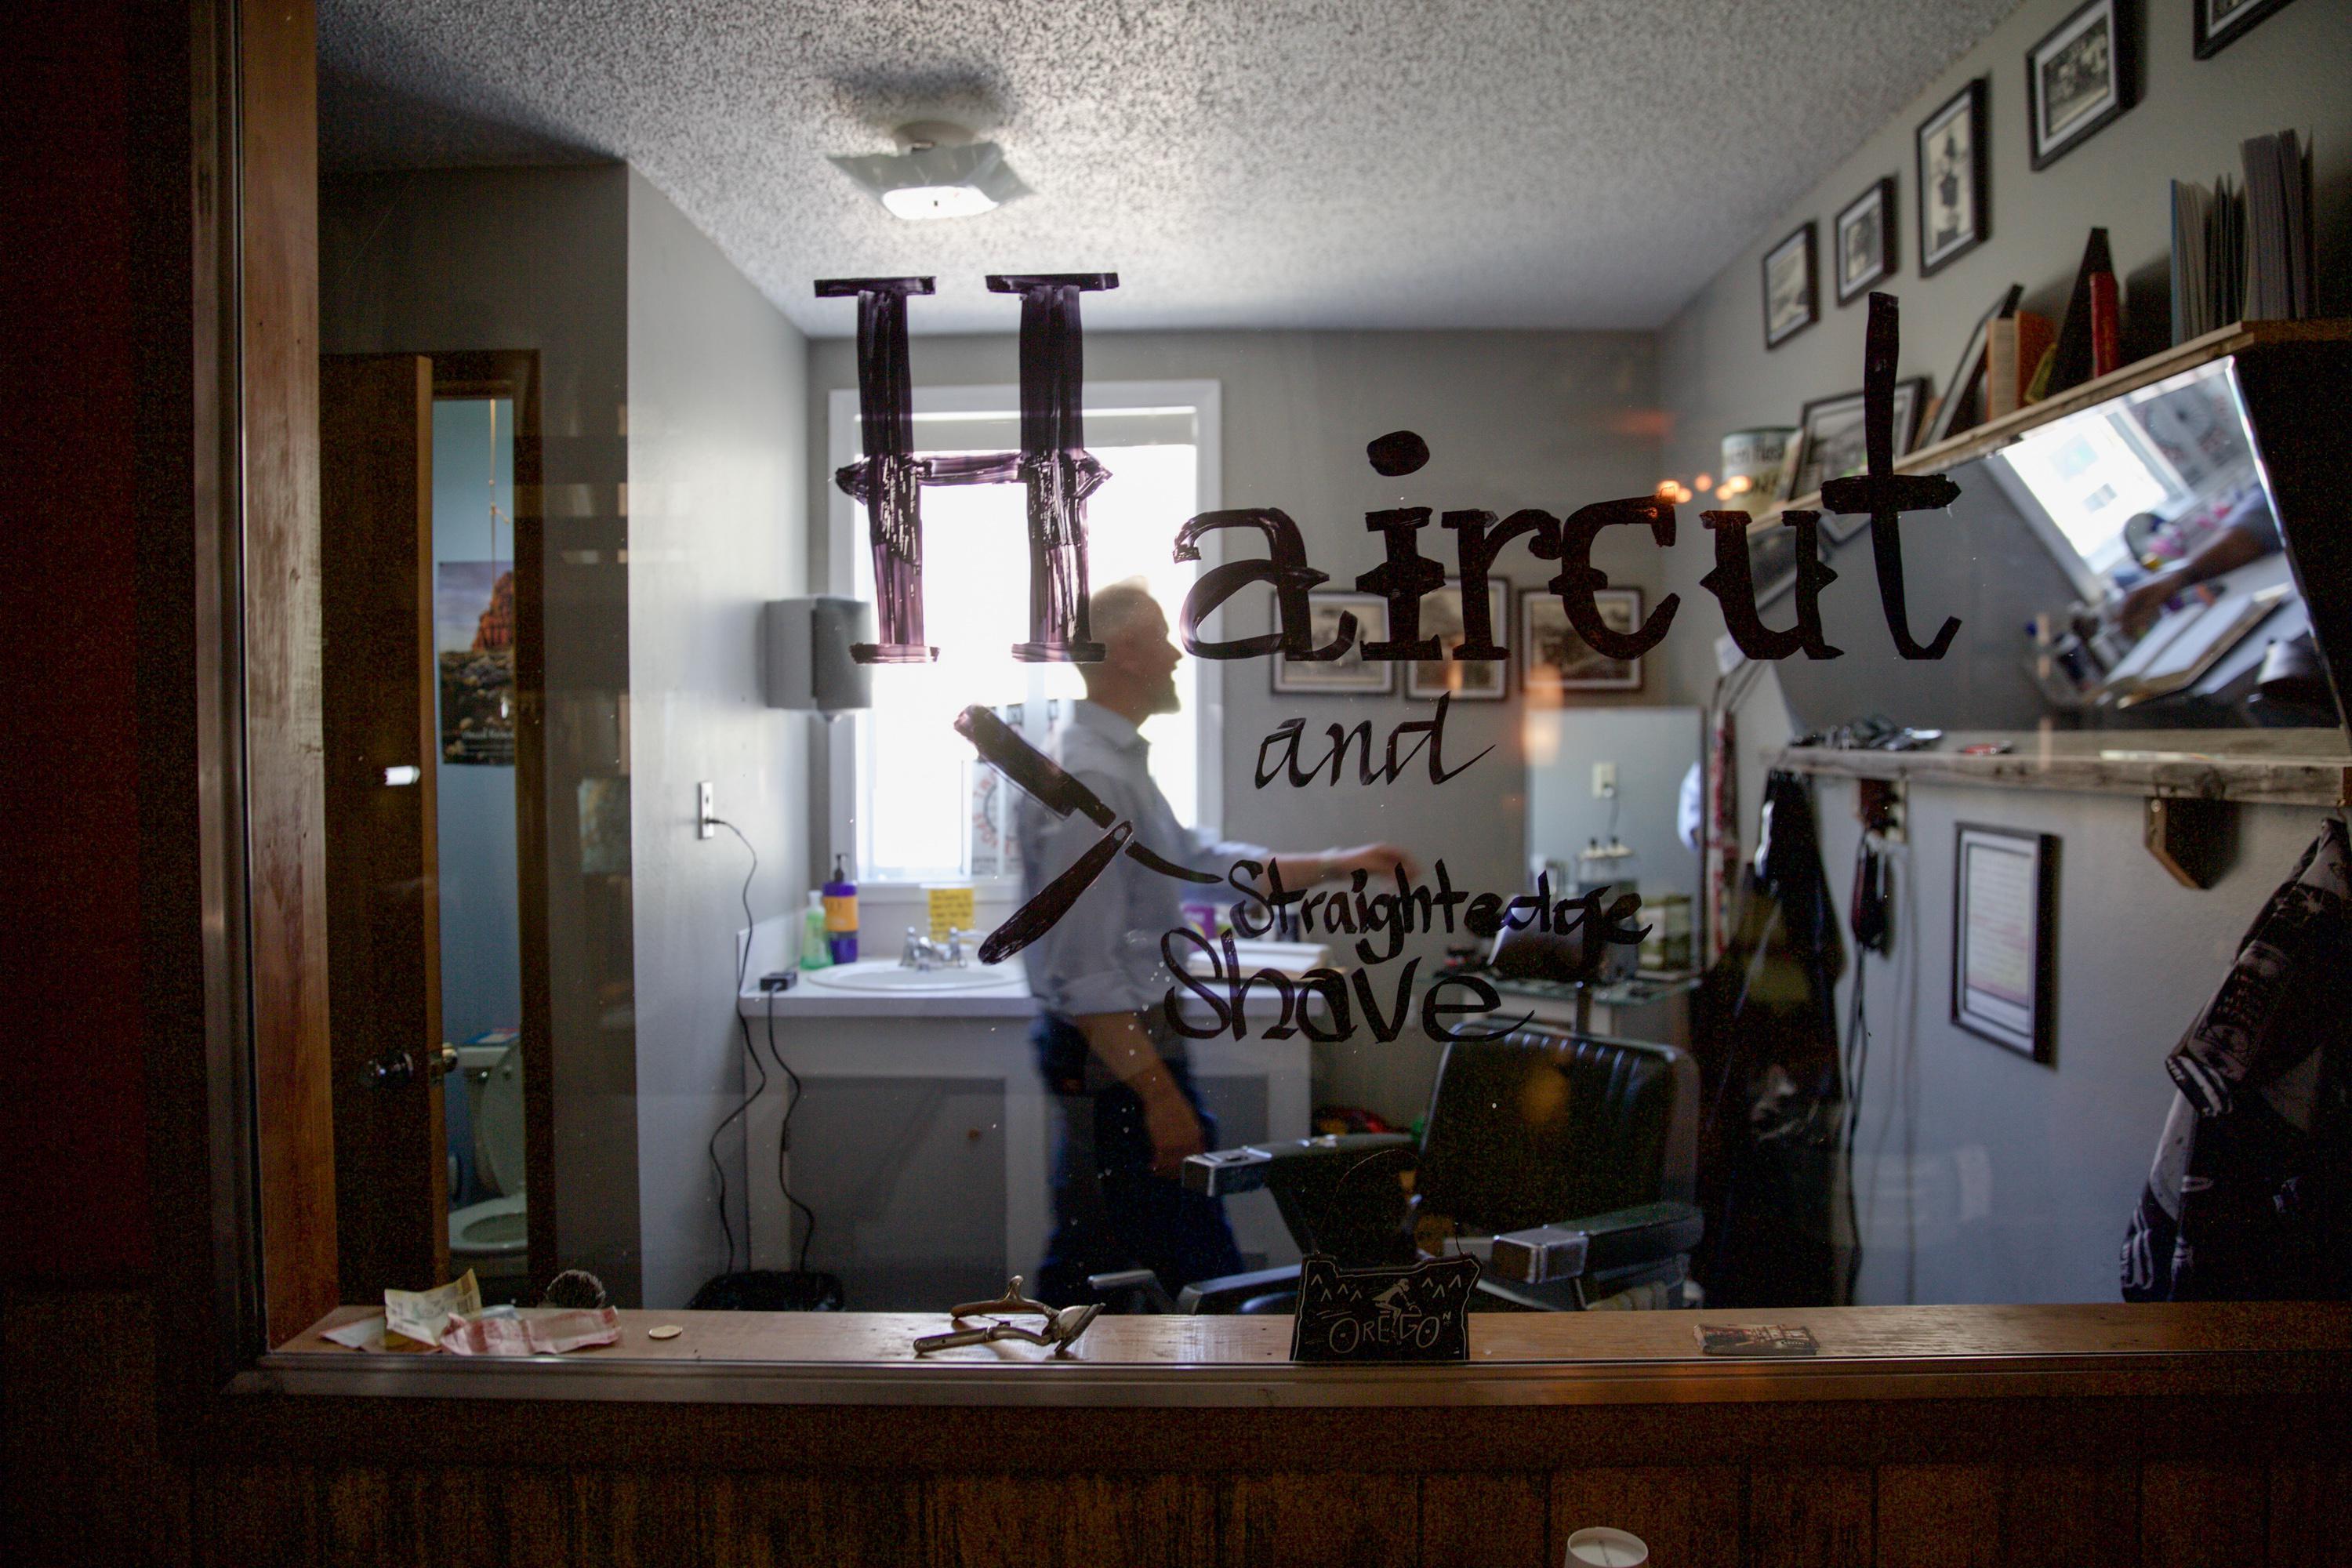 Mayor Patrick Farrell tidies up his barber shop in Mitchell, Ore., Monday, June 3, 2019. Along with being the small town's mayor, Farrell is a school bus driver, barber, hostel owner and pastor.